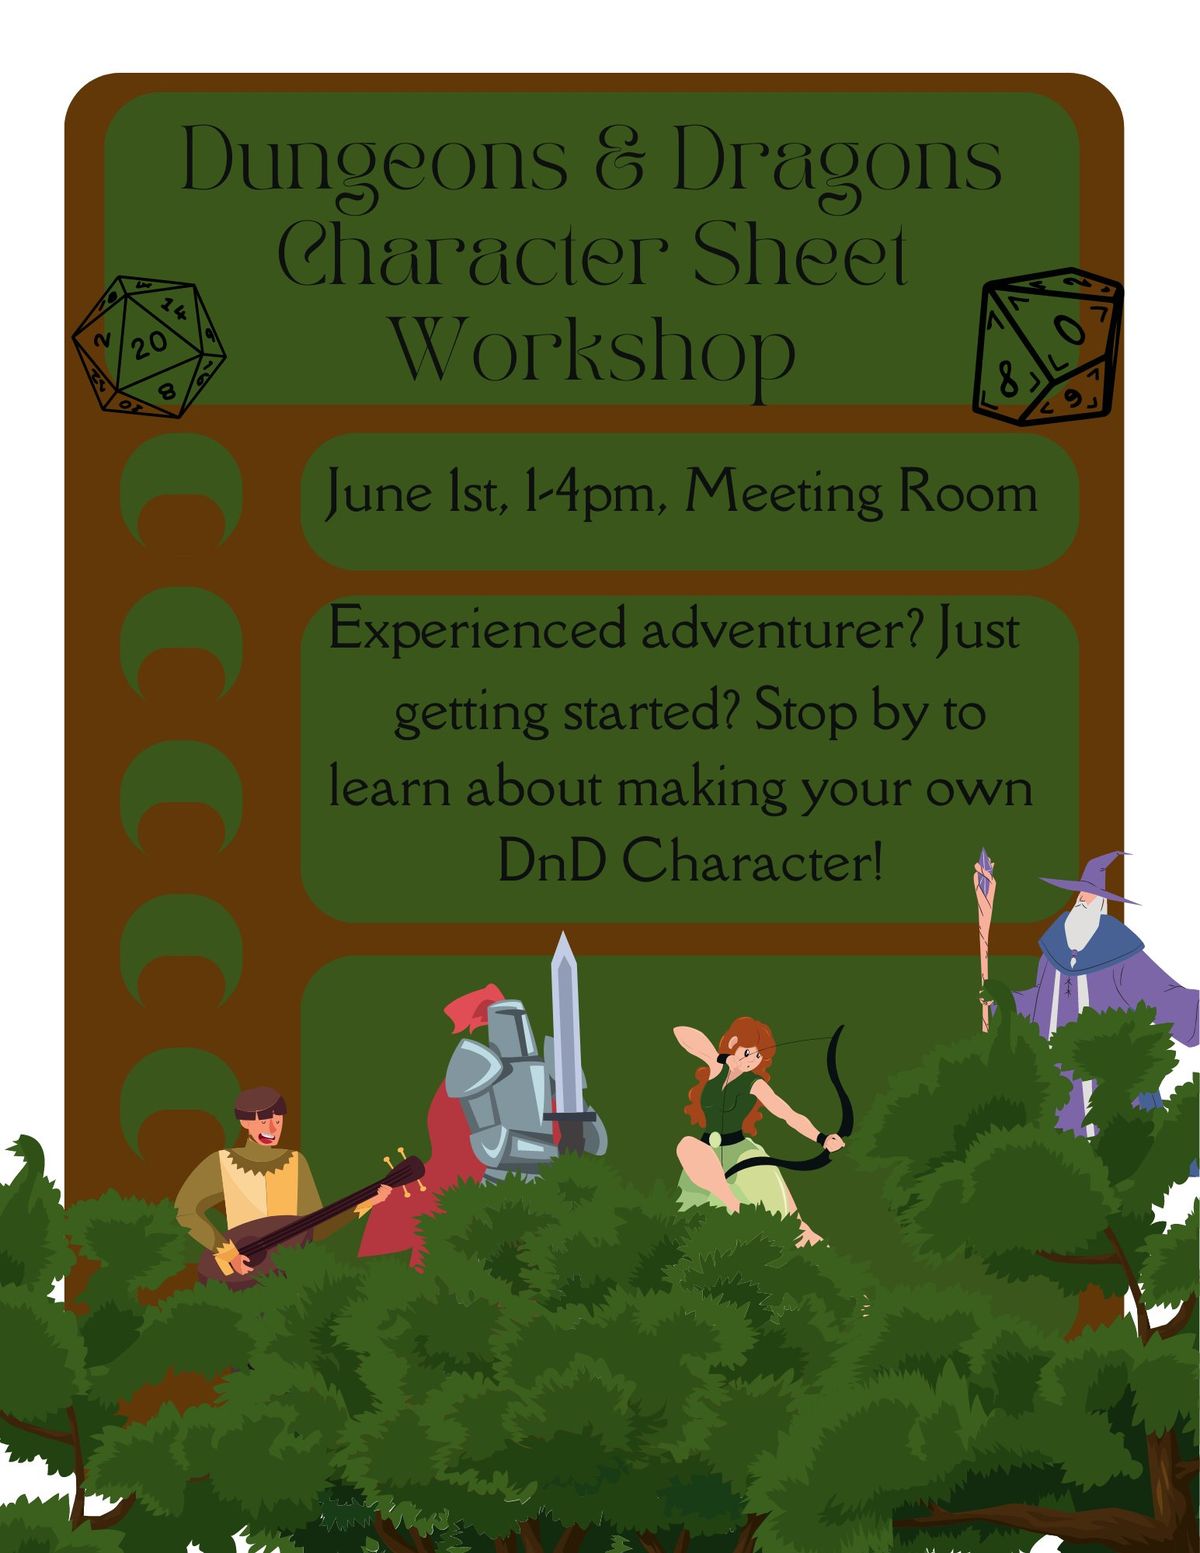 Dungeons and Dragons Character Sheet Workshop